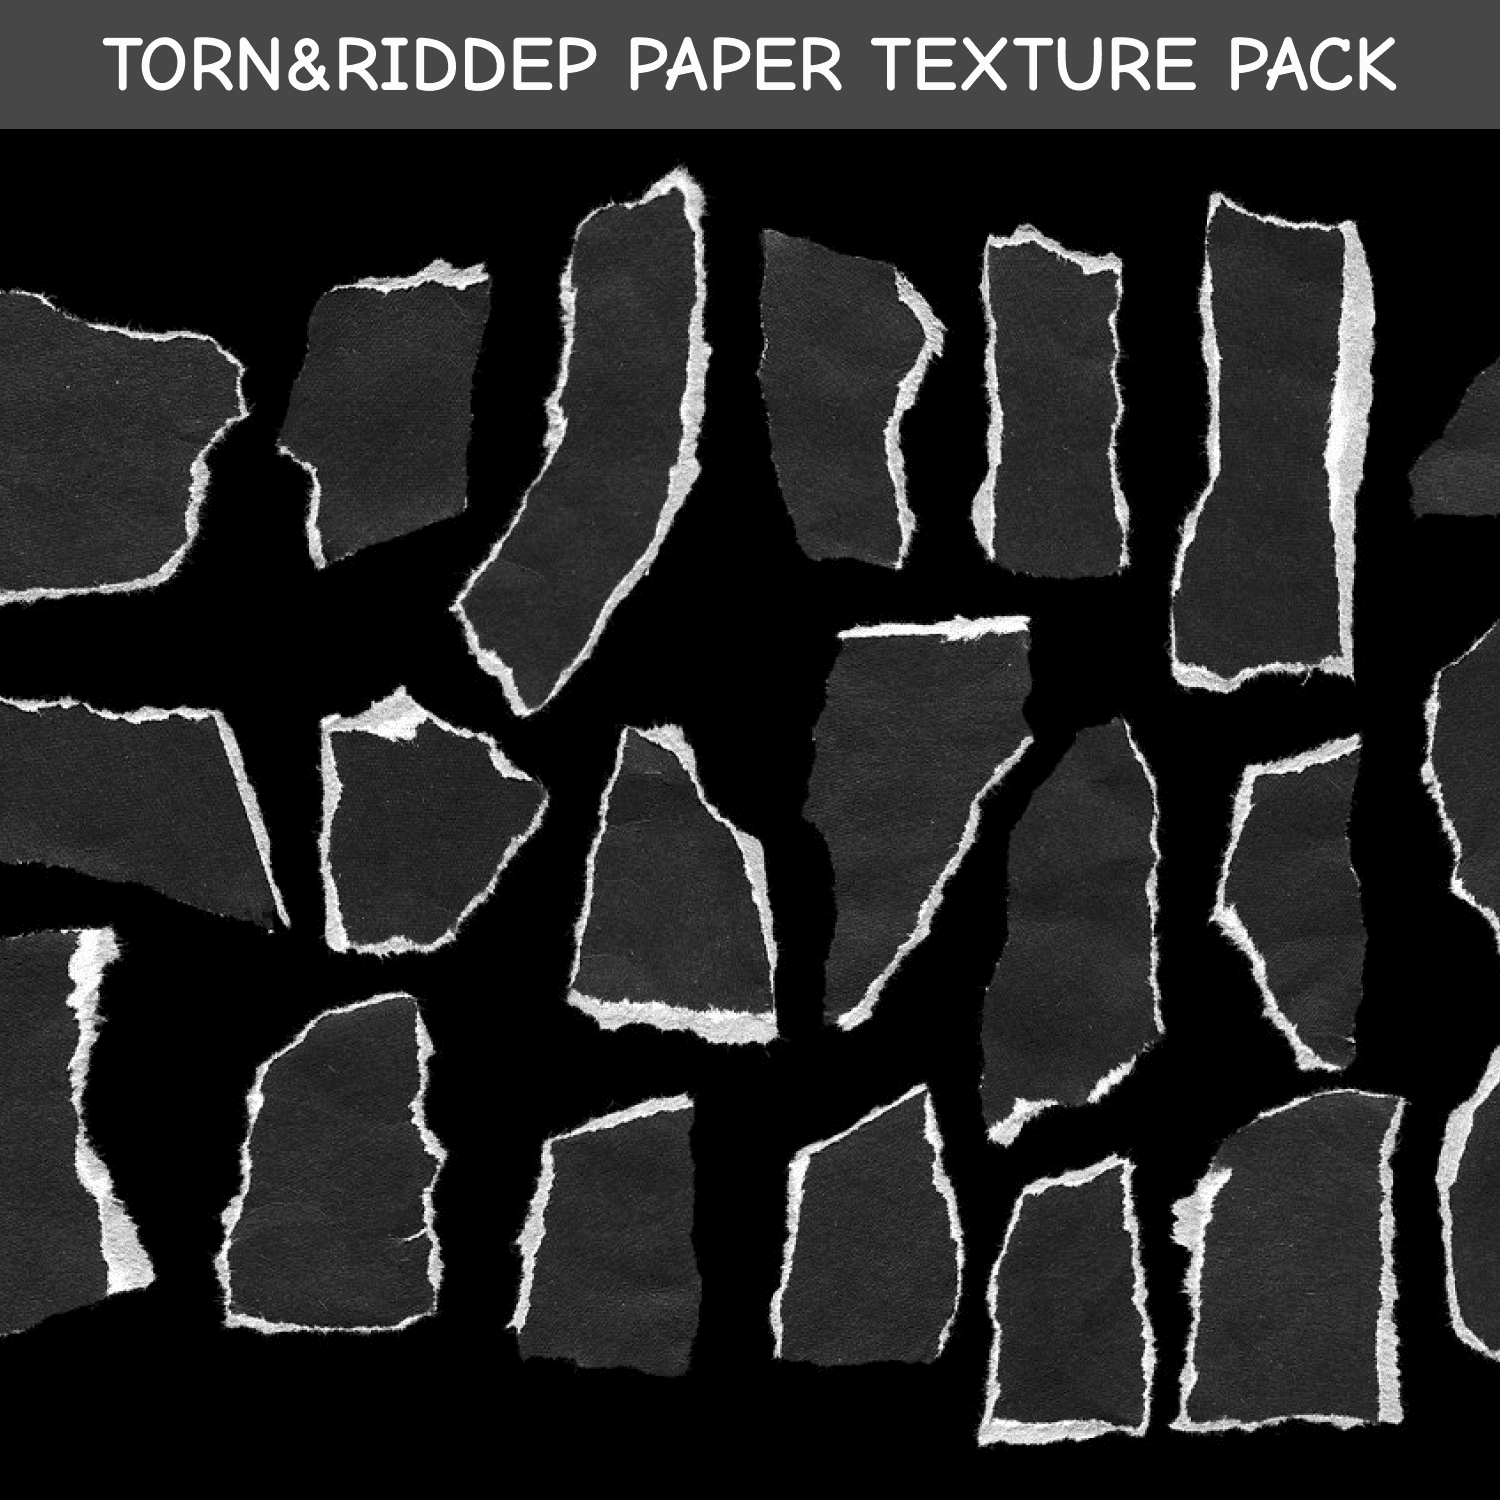 TORN&RIDDEP PAPER TEXTURE PACK cover.